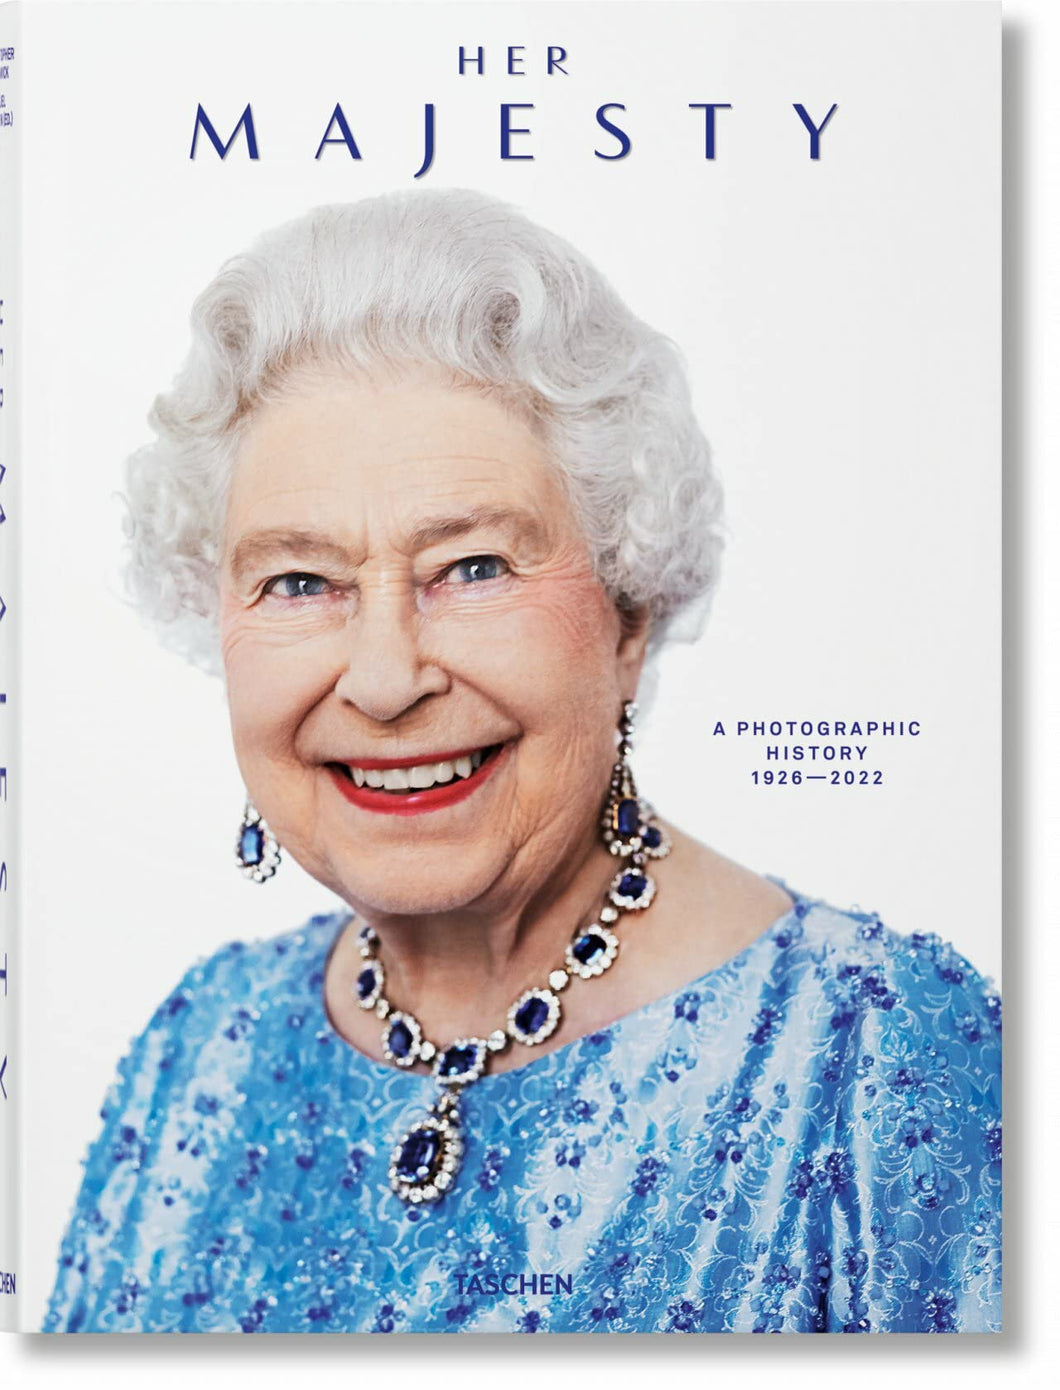 Taschen-Her Majesty. A Photographic History 1926–2022